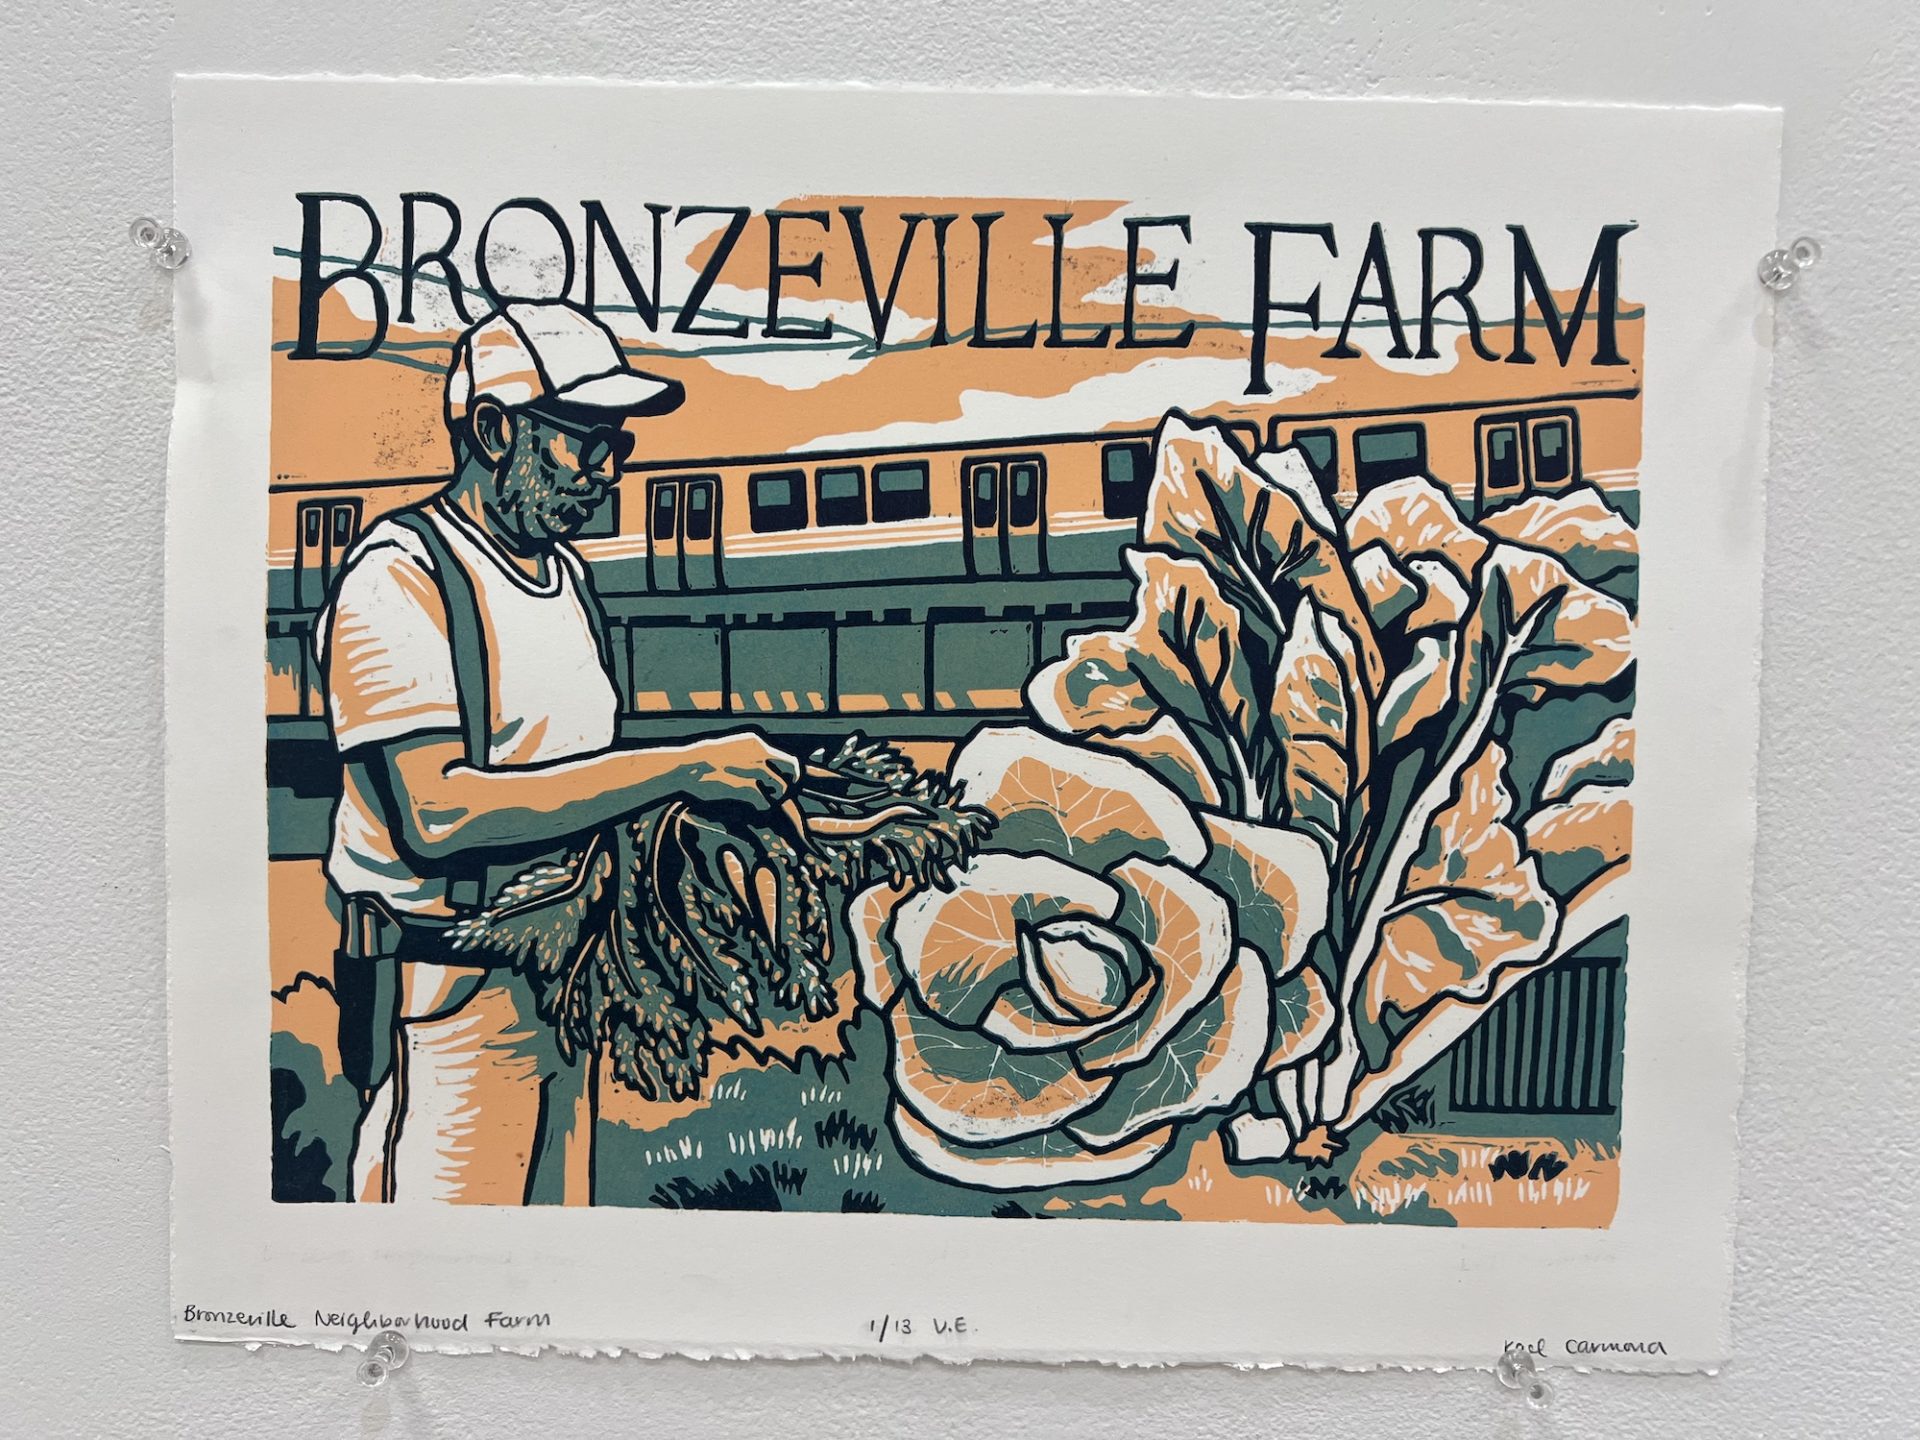 A orange and green print reads "Bronzeville Farm" at the top. There is a train the background with a farmer on the left, holding large leafy vegetables